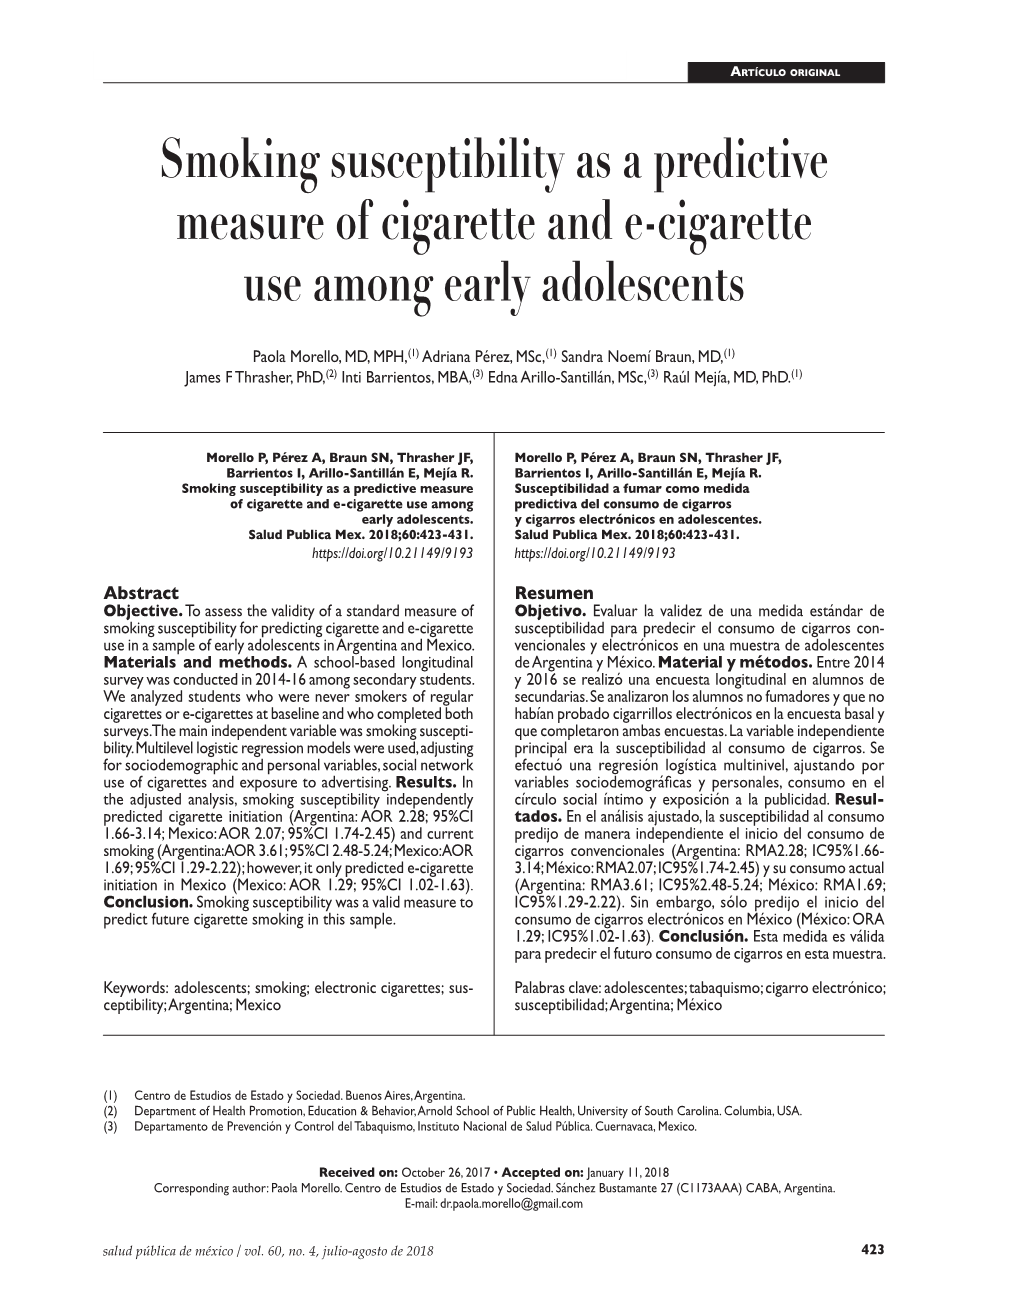 Smoking Susceptibility As a Predictive Measure of Cigarette and E-Cigarette Use Among Early Adolescents